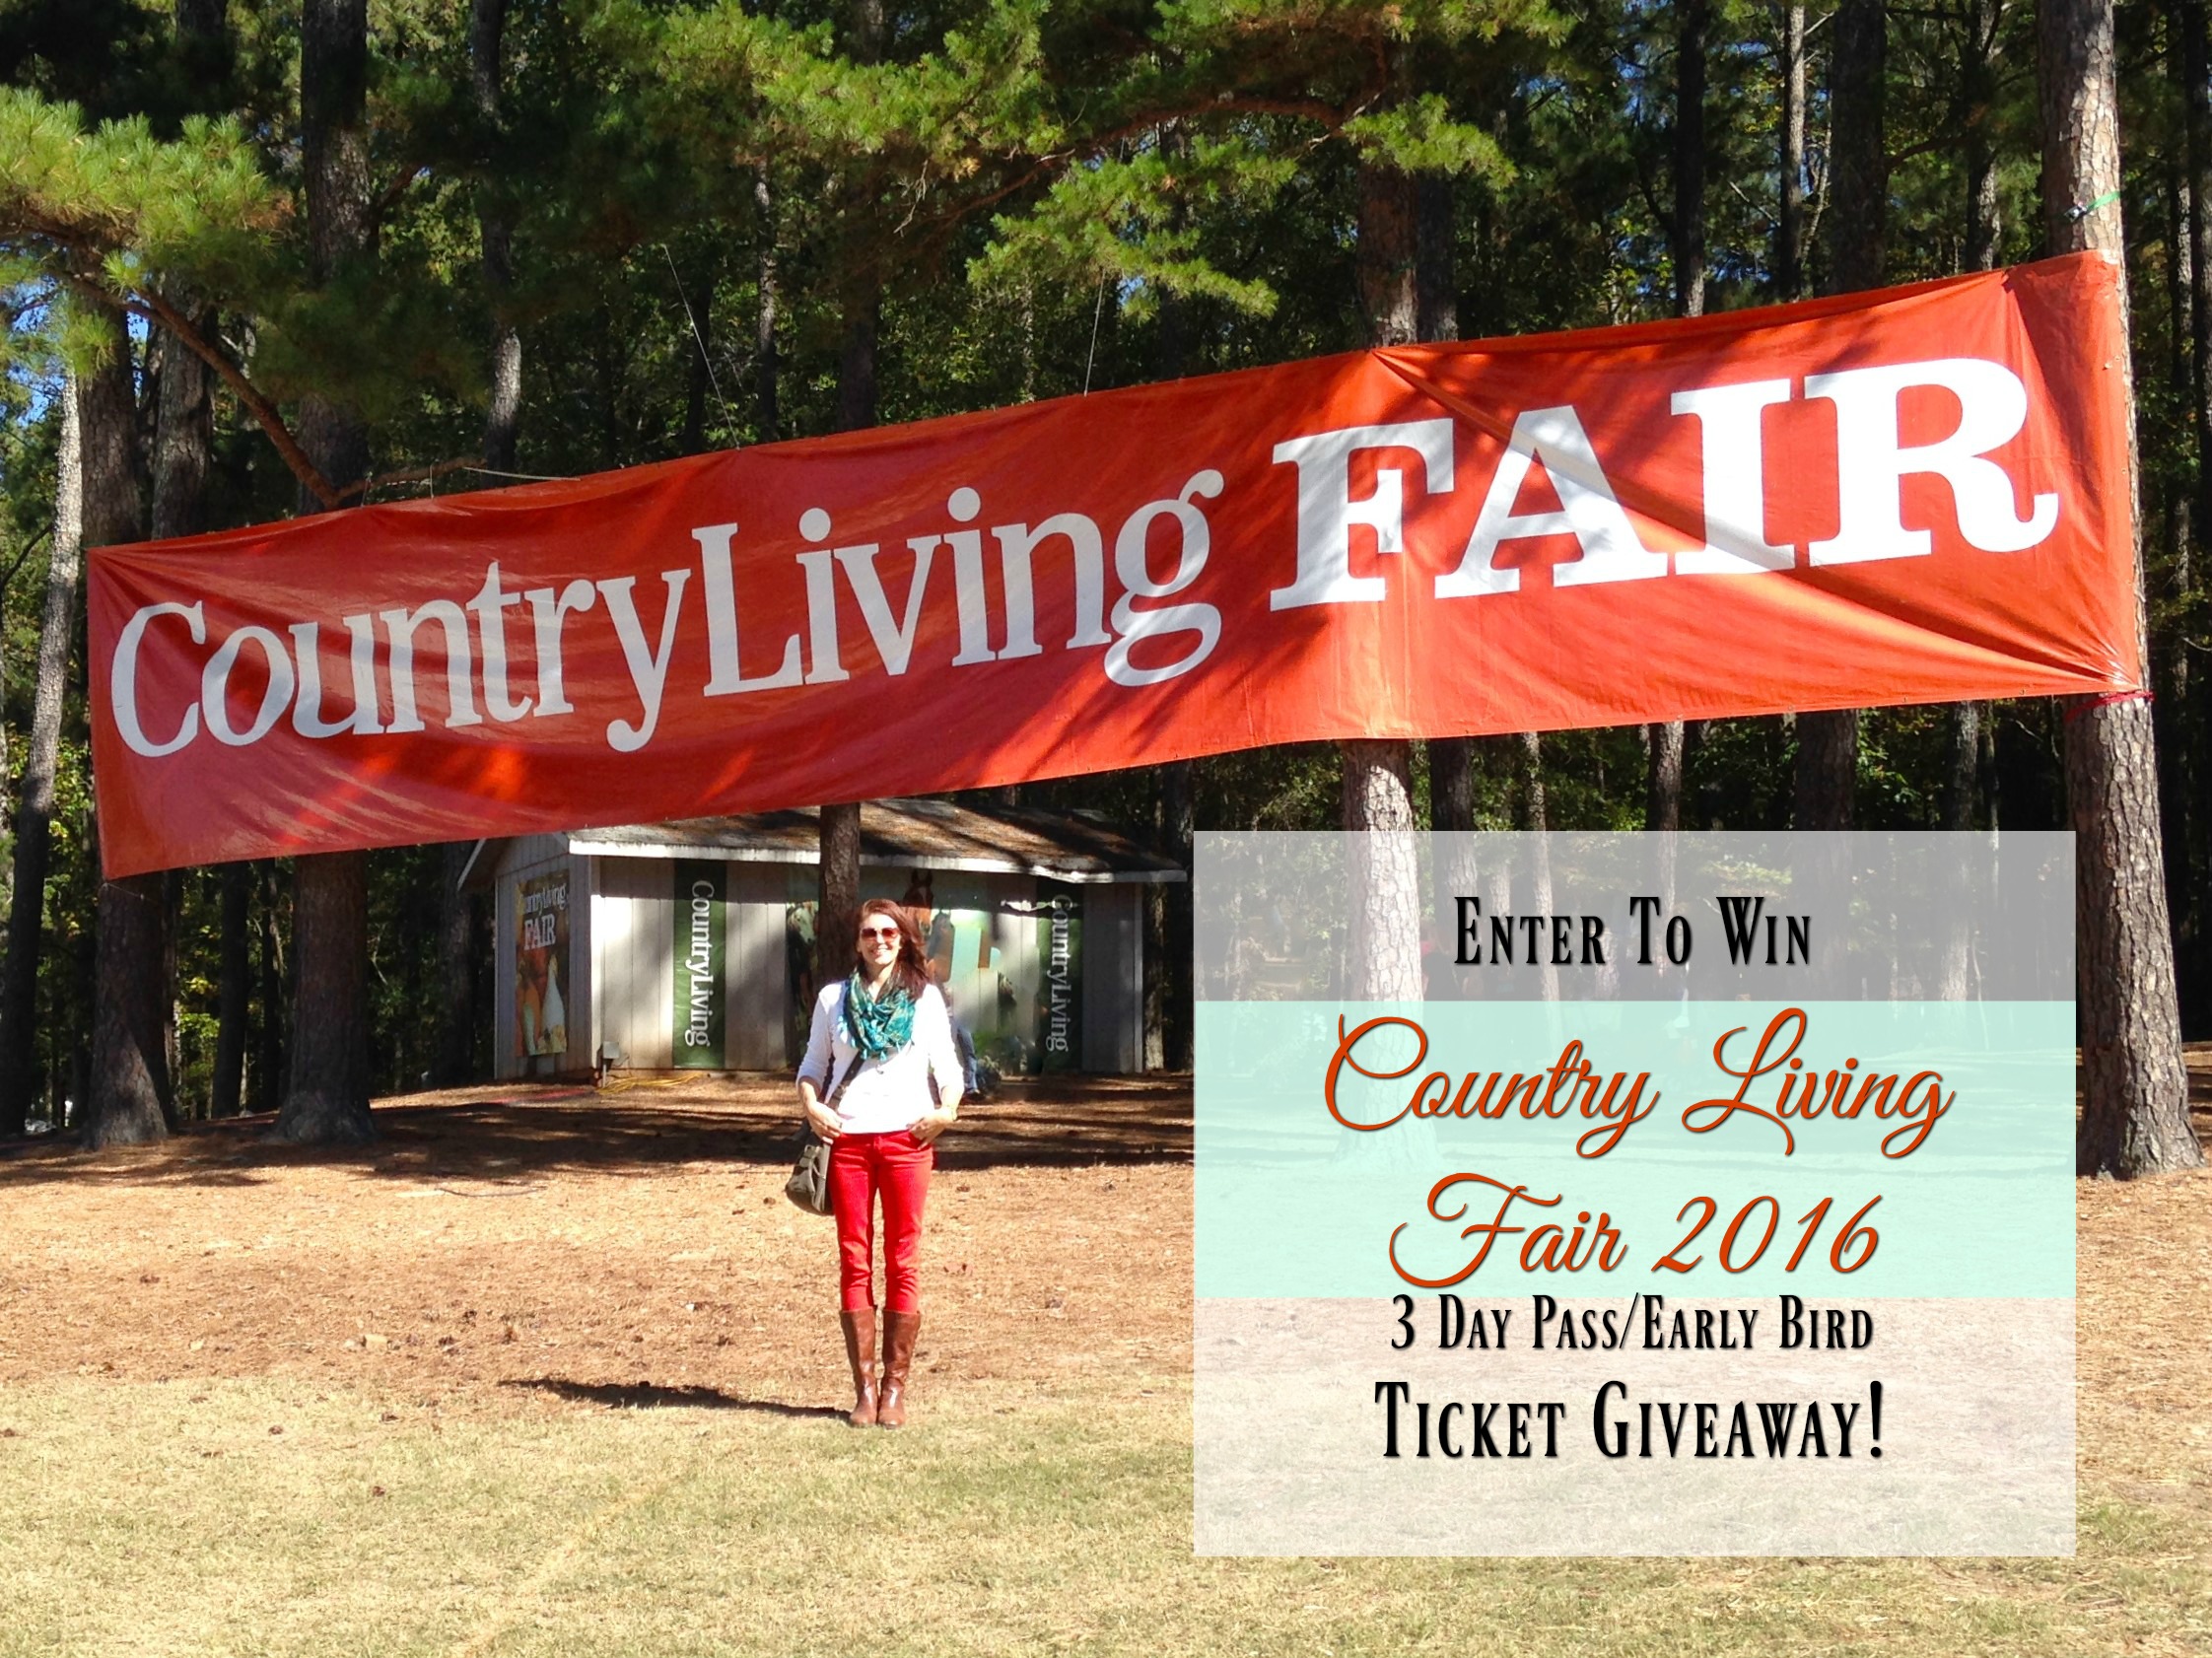 Country Living Fair Ticket Giveaway Come See Mandy On Stage